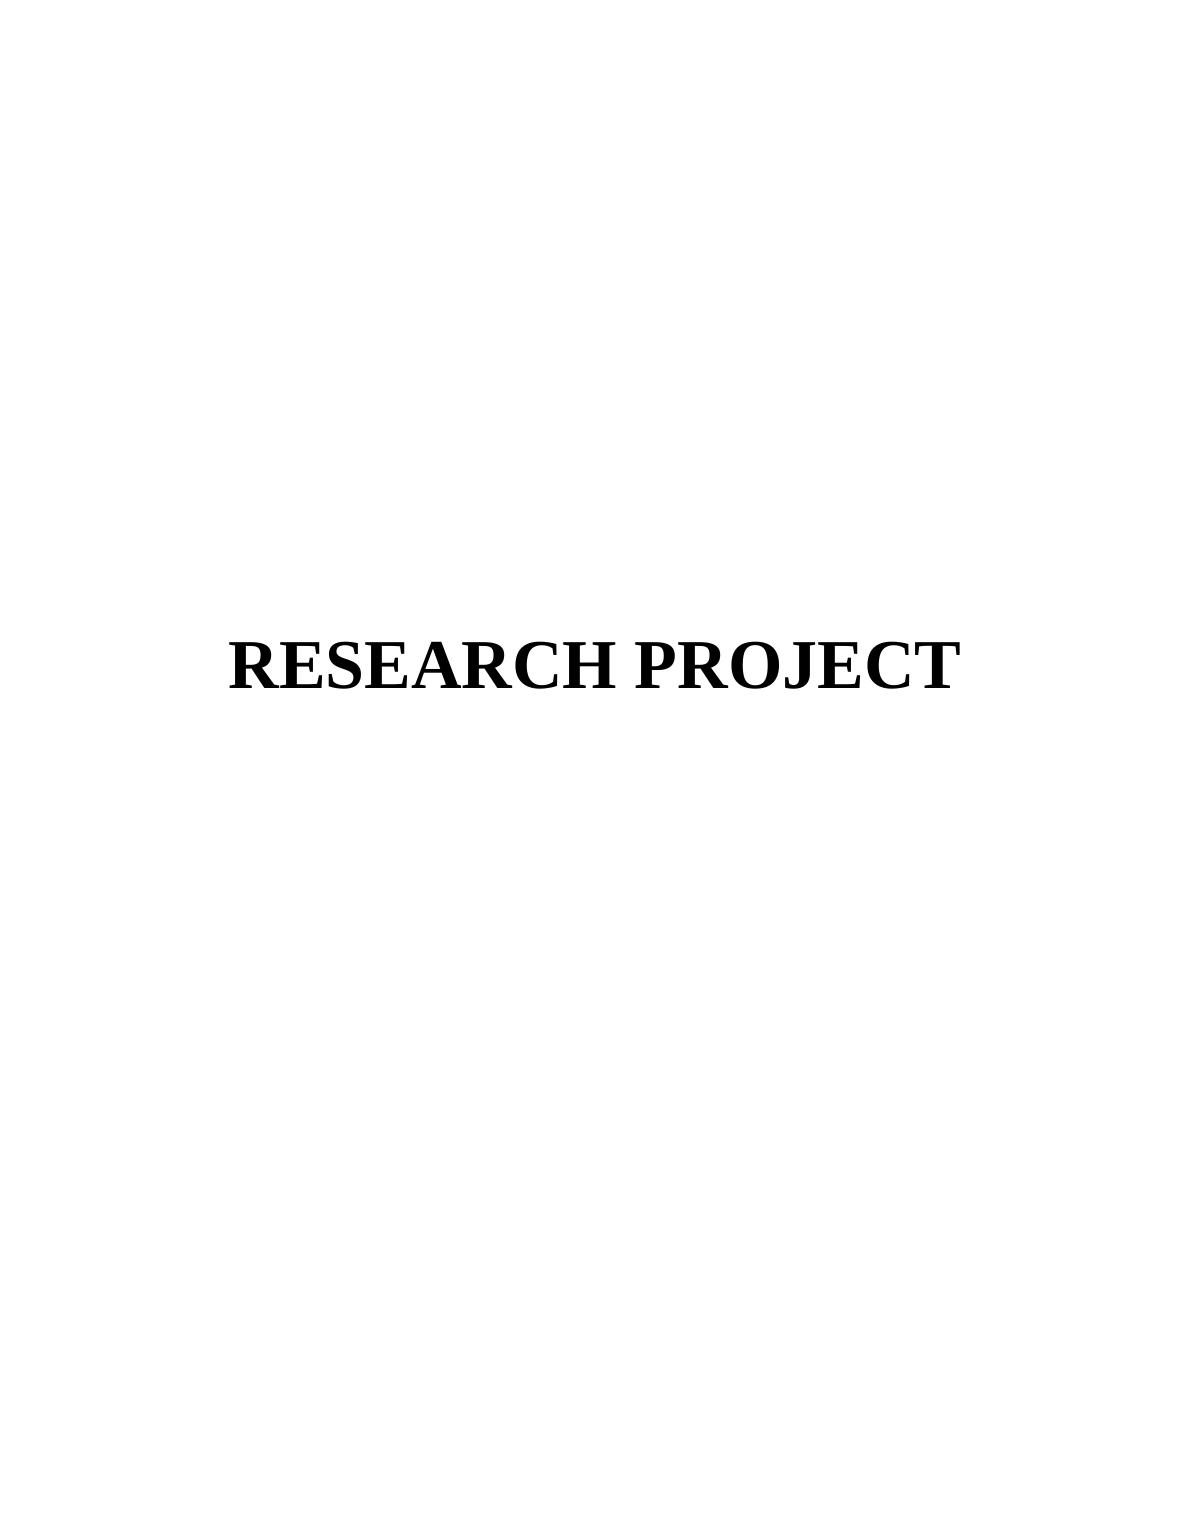 TASK 11 1.1 Introduction 11.2 Factors contribute in research project 2 1.3 Research aims and objectives 4 1.5 Research methodology 4 1.5 Research questions 4 1.5 Research methodology 4 1.5 Research me_1